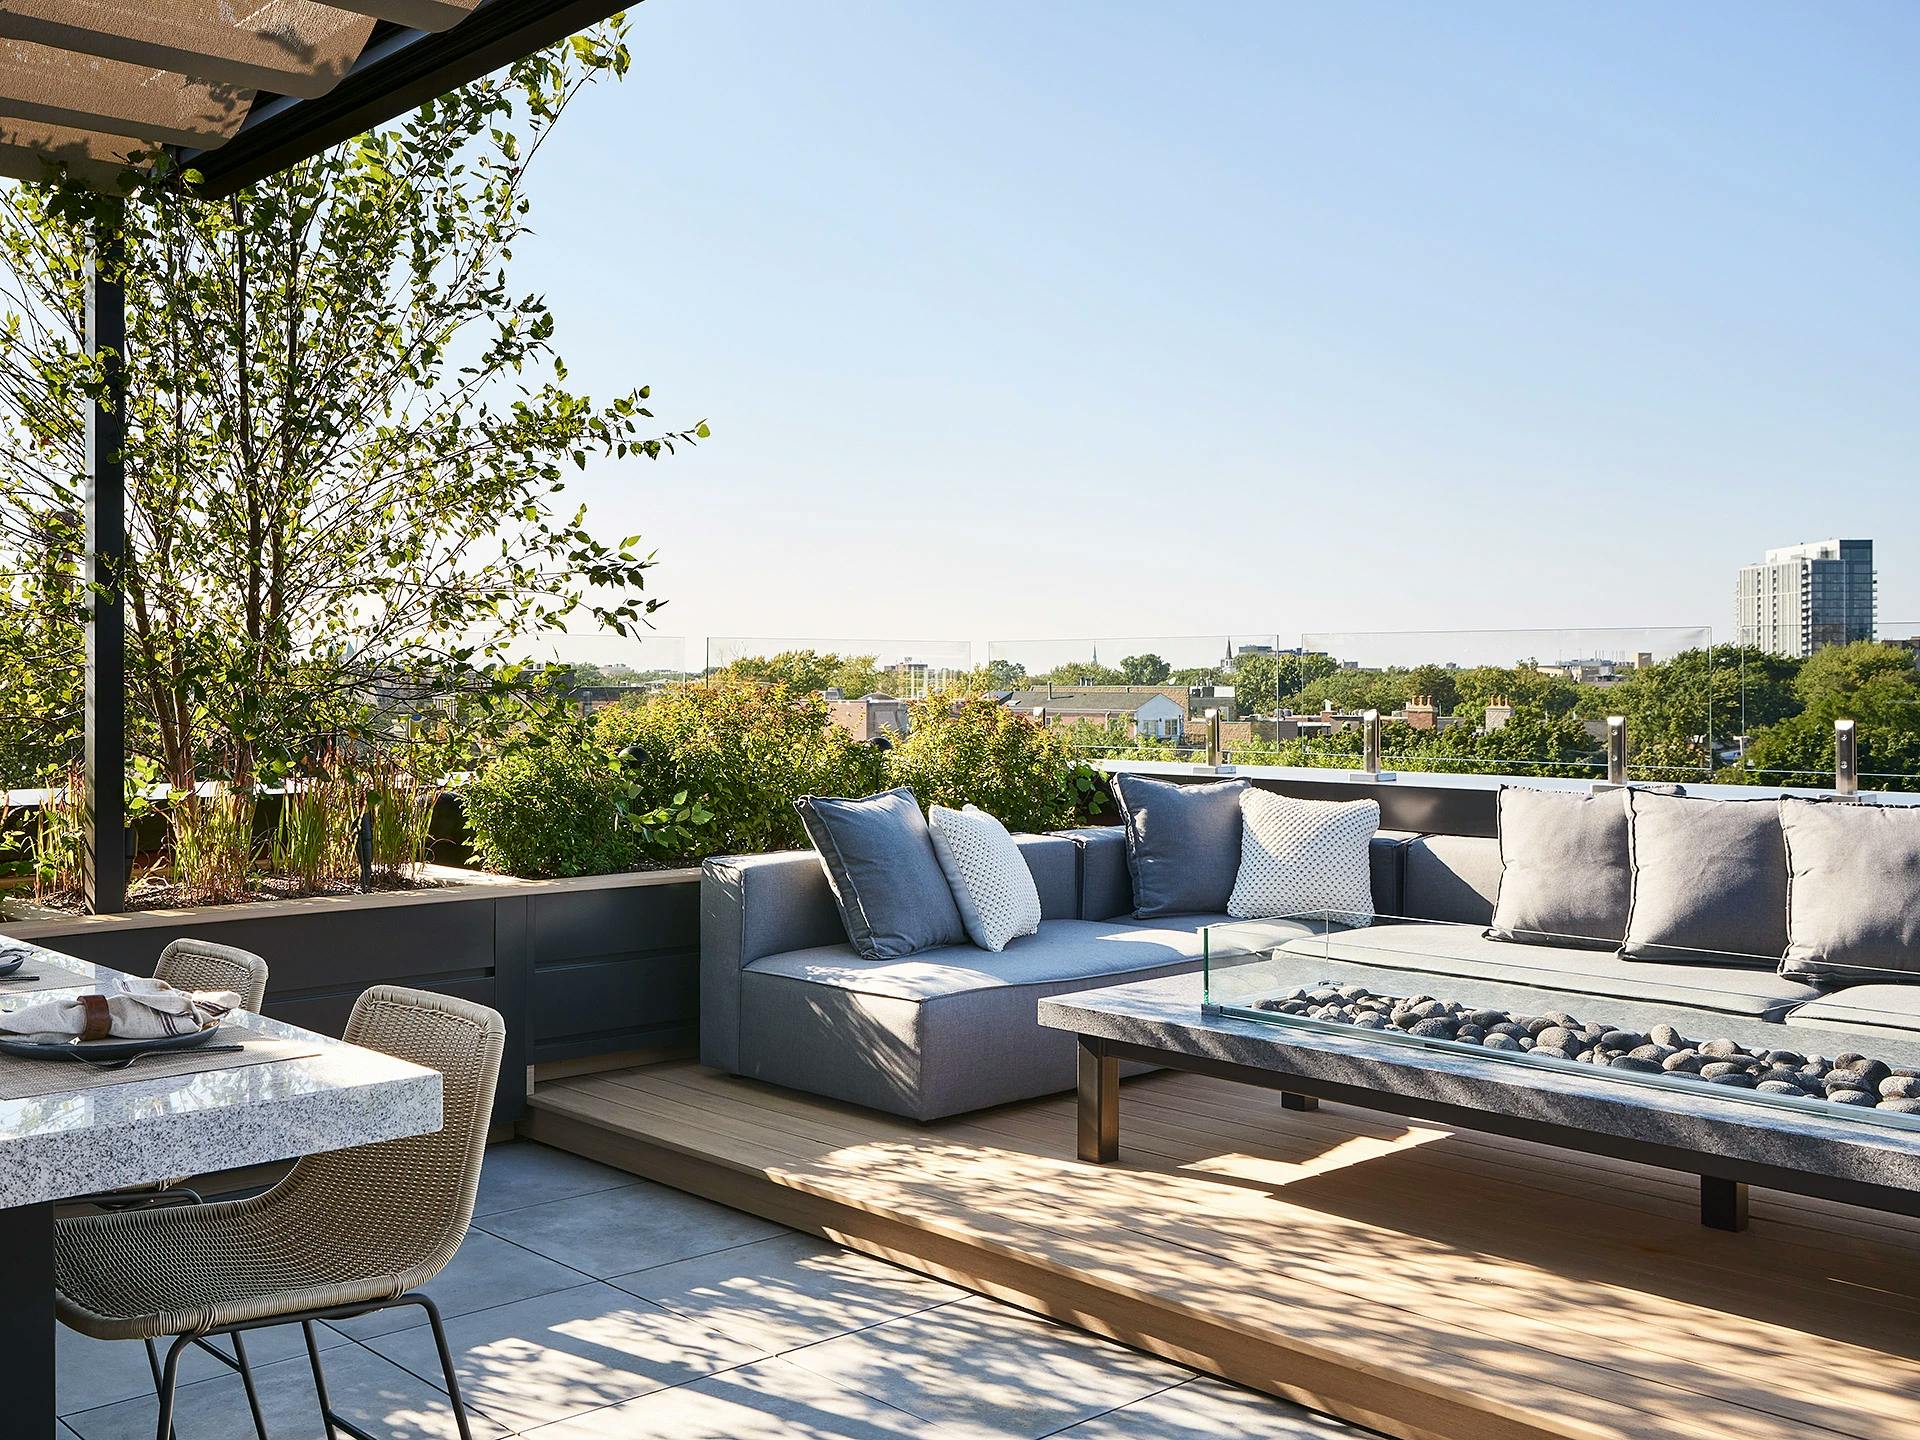 Roof deck lounge area with a gray sectional sofa overlooking a Chicago skyline.